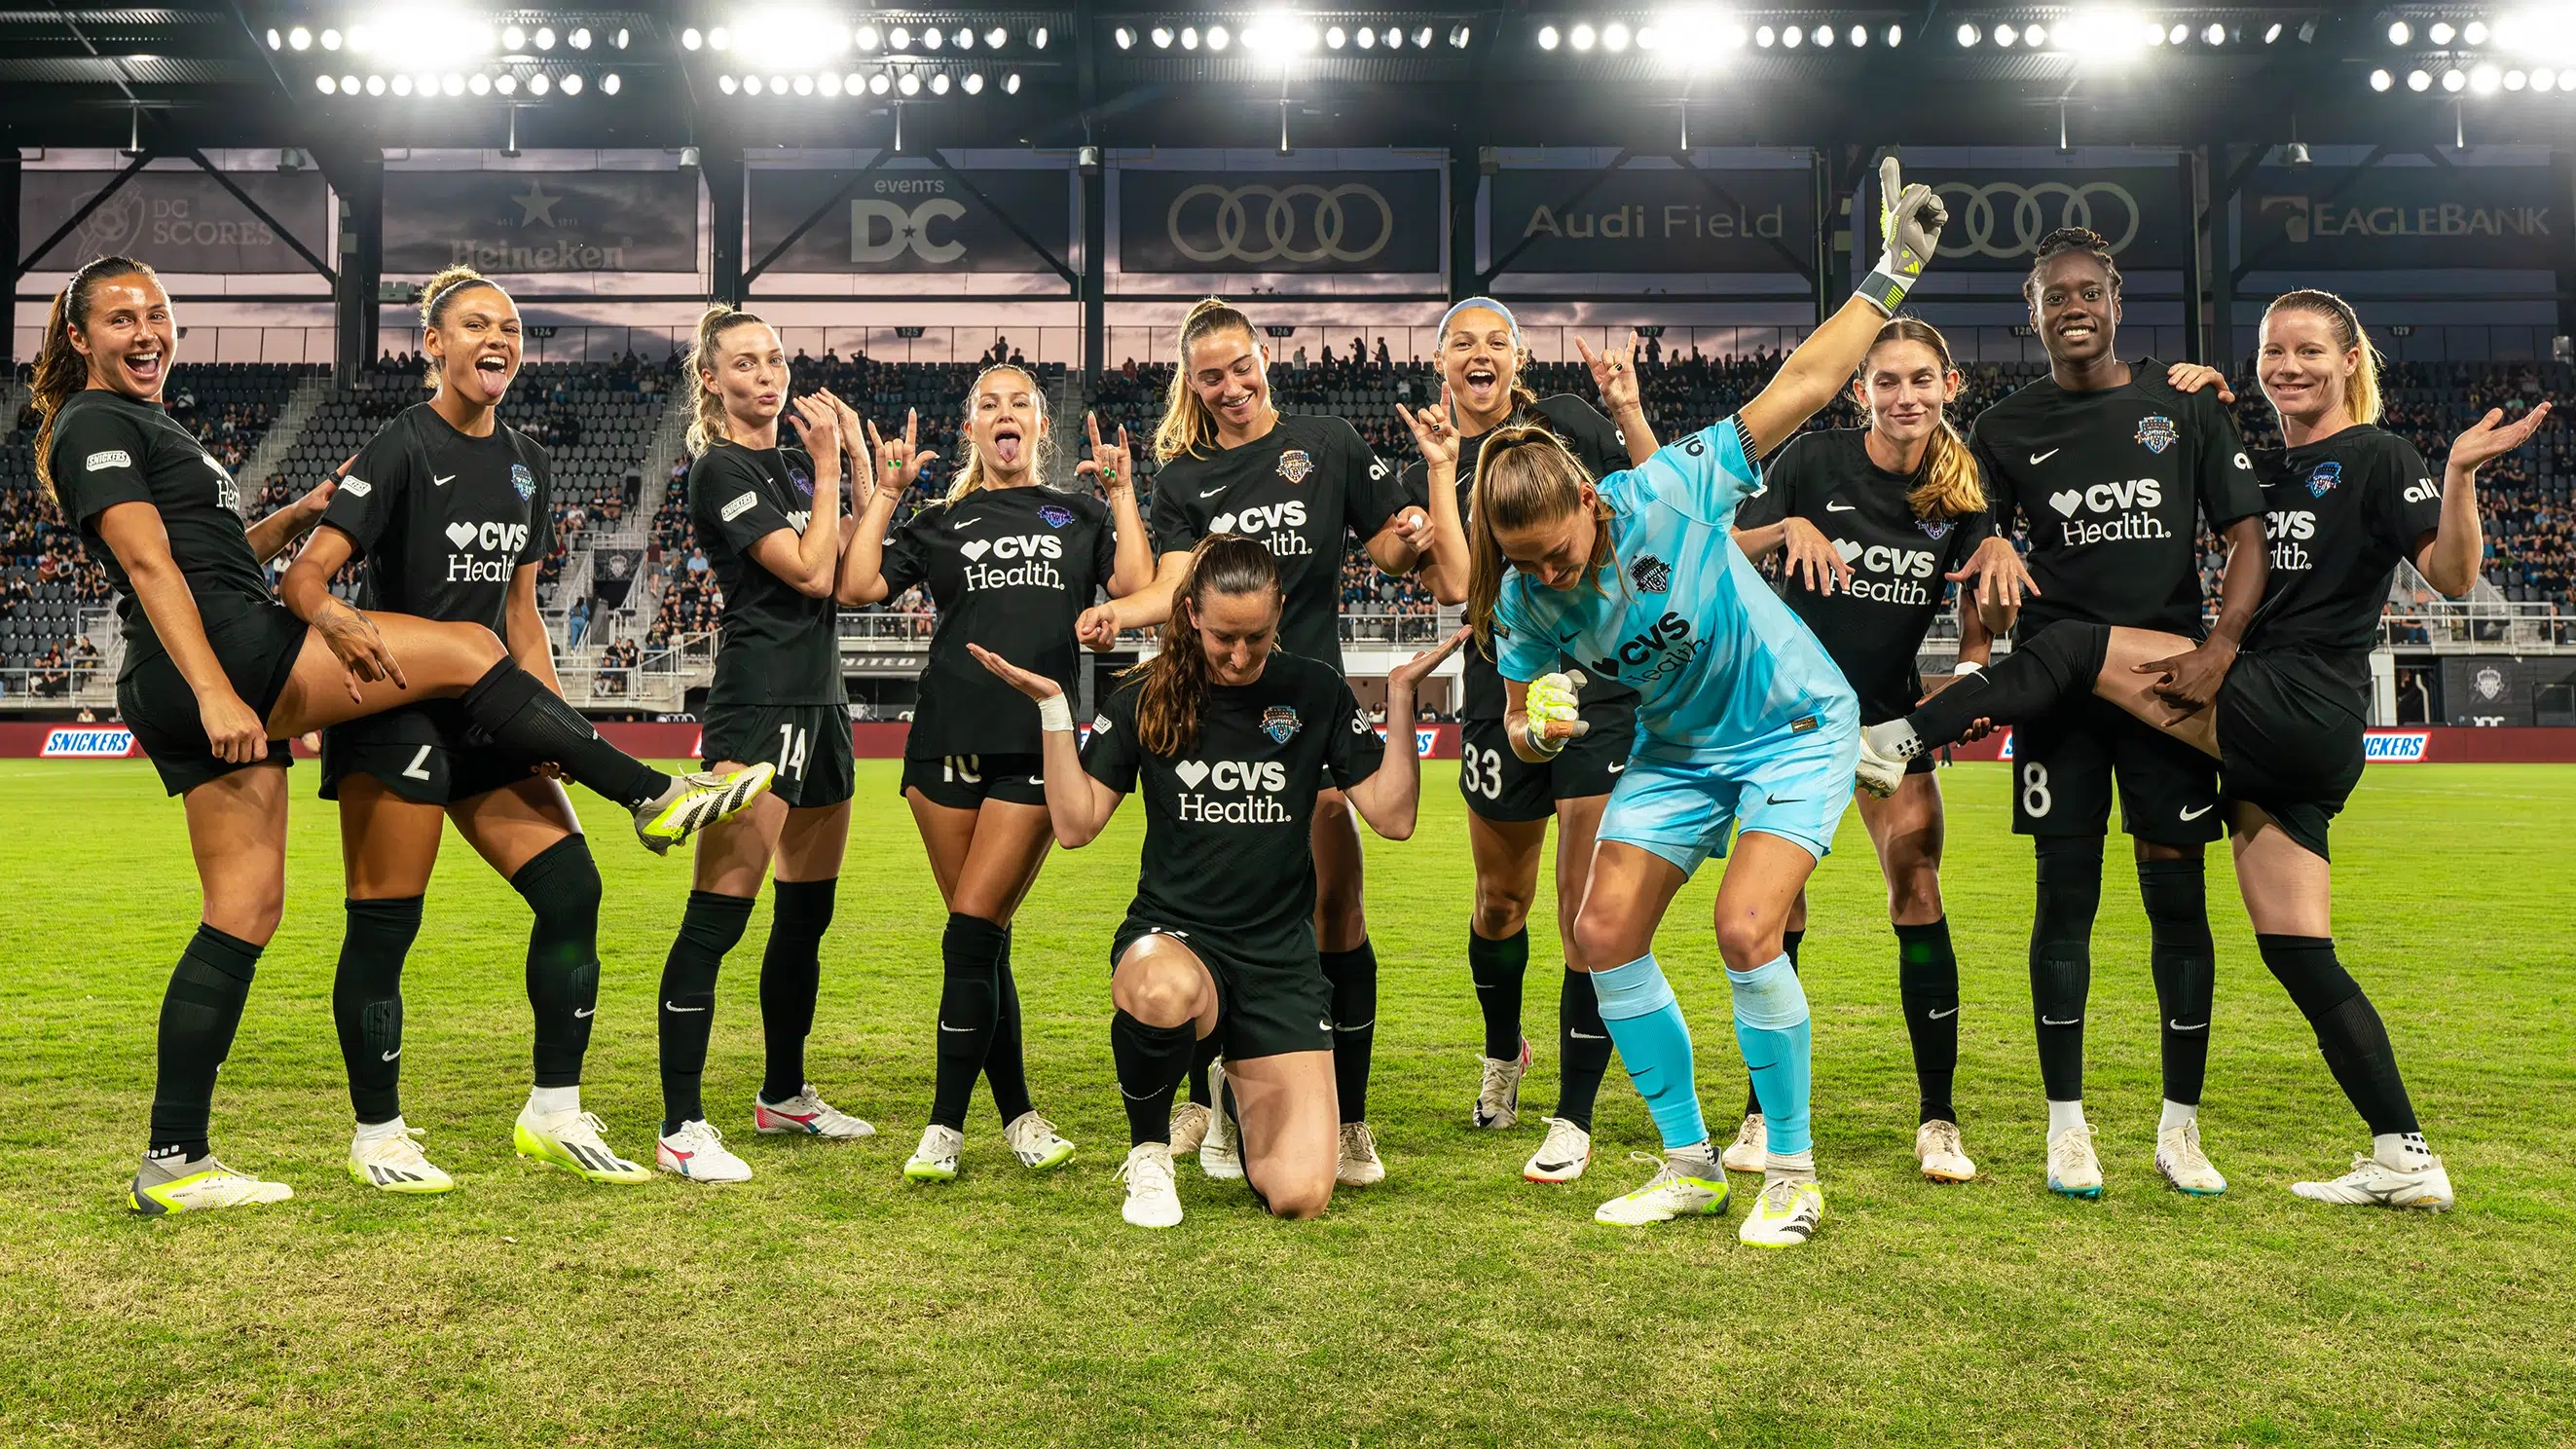 The starting XI for the Washington Spirit pose in different rock and roll stances. They wear all black uniforms except the goalie in light blue.